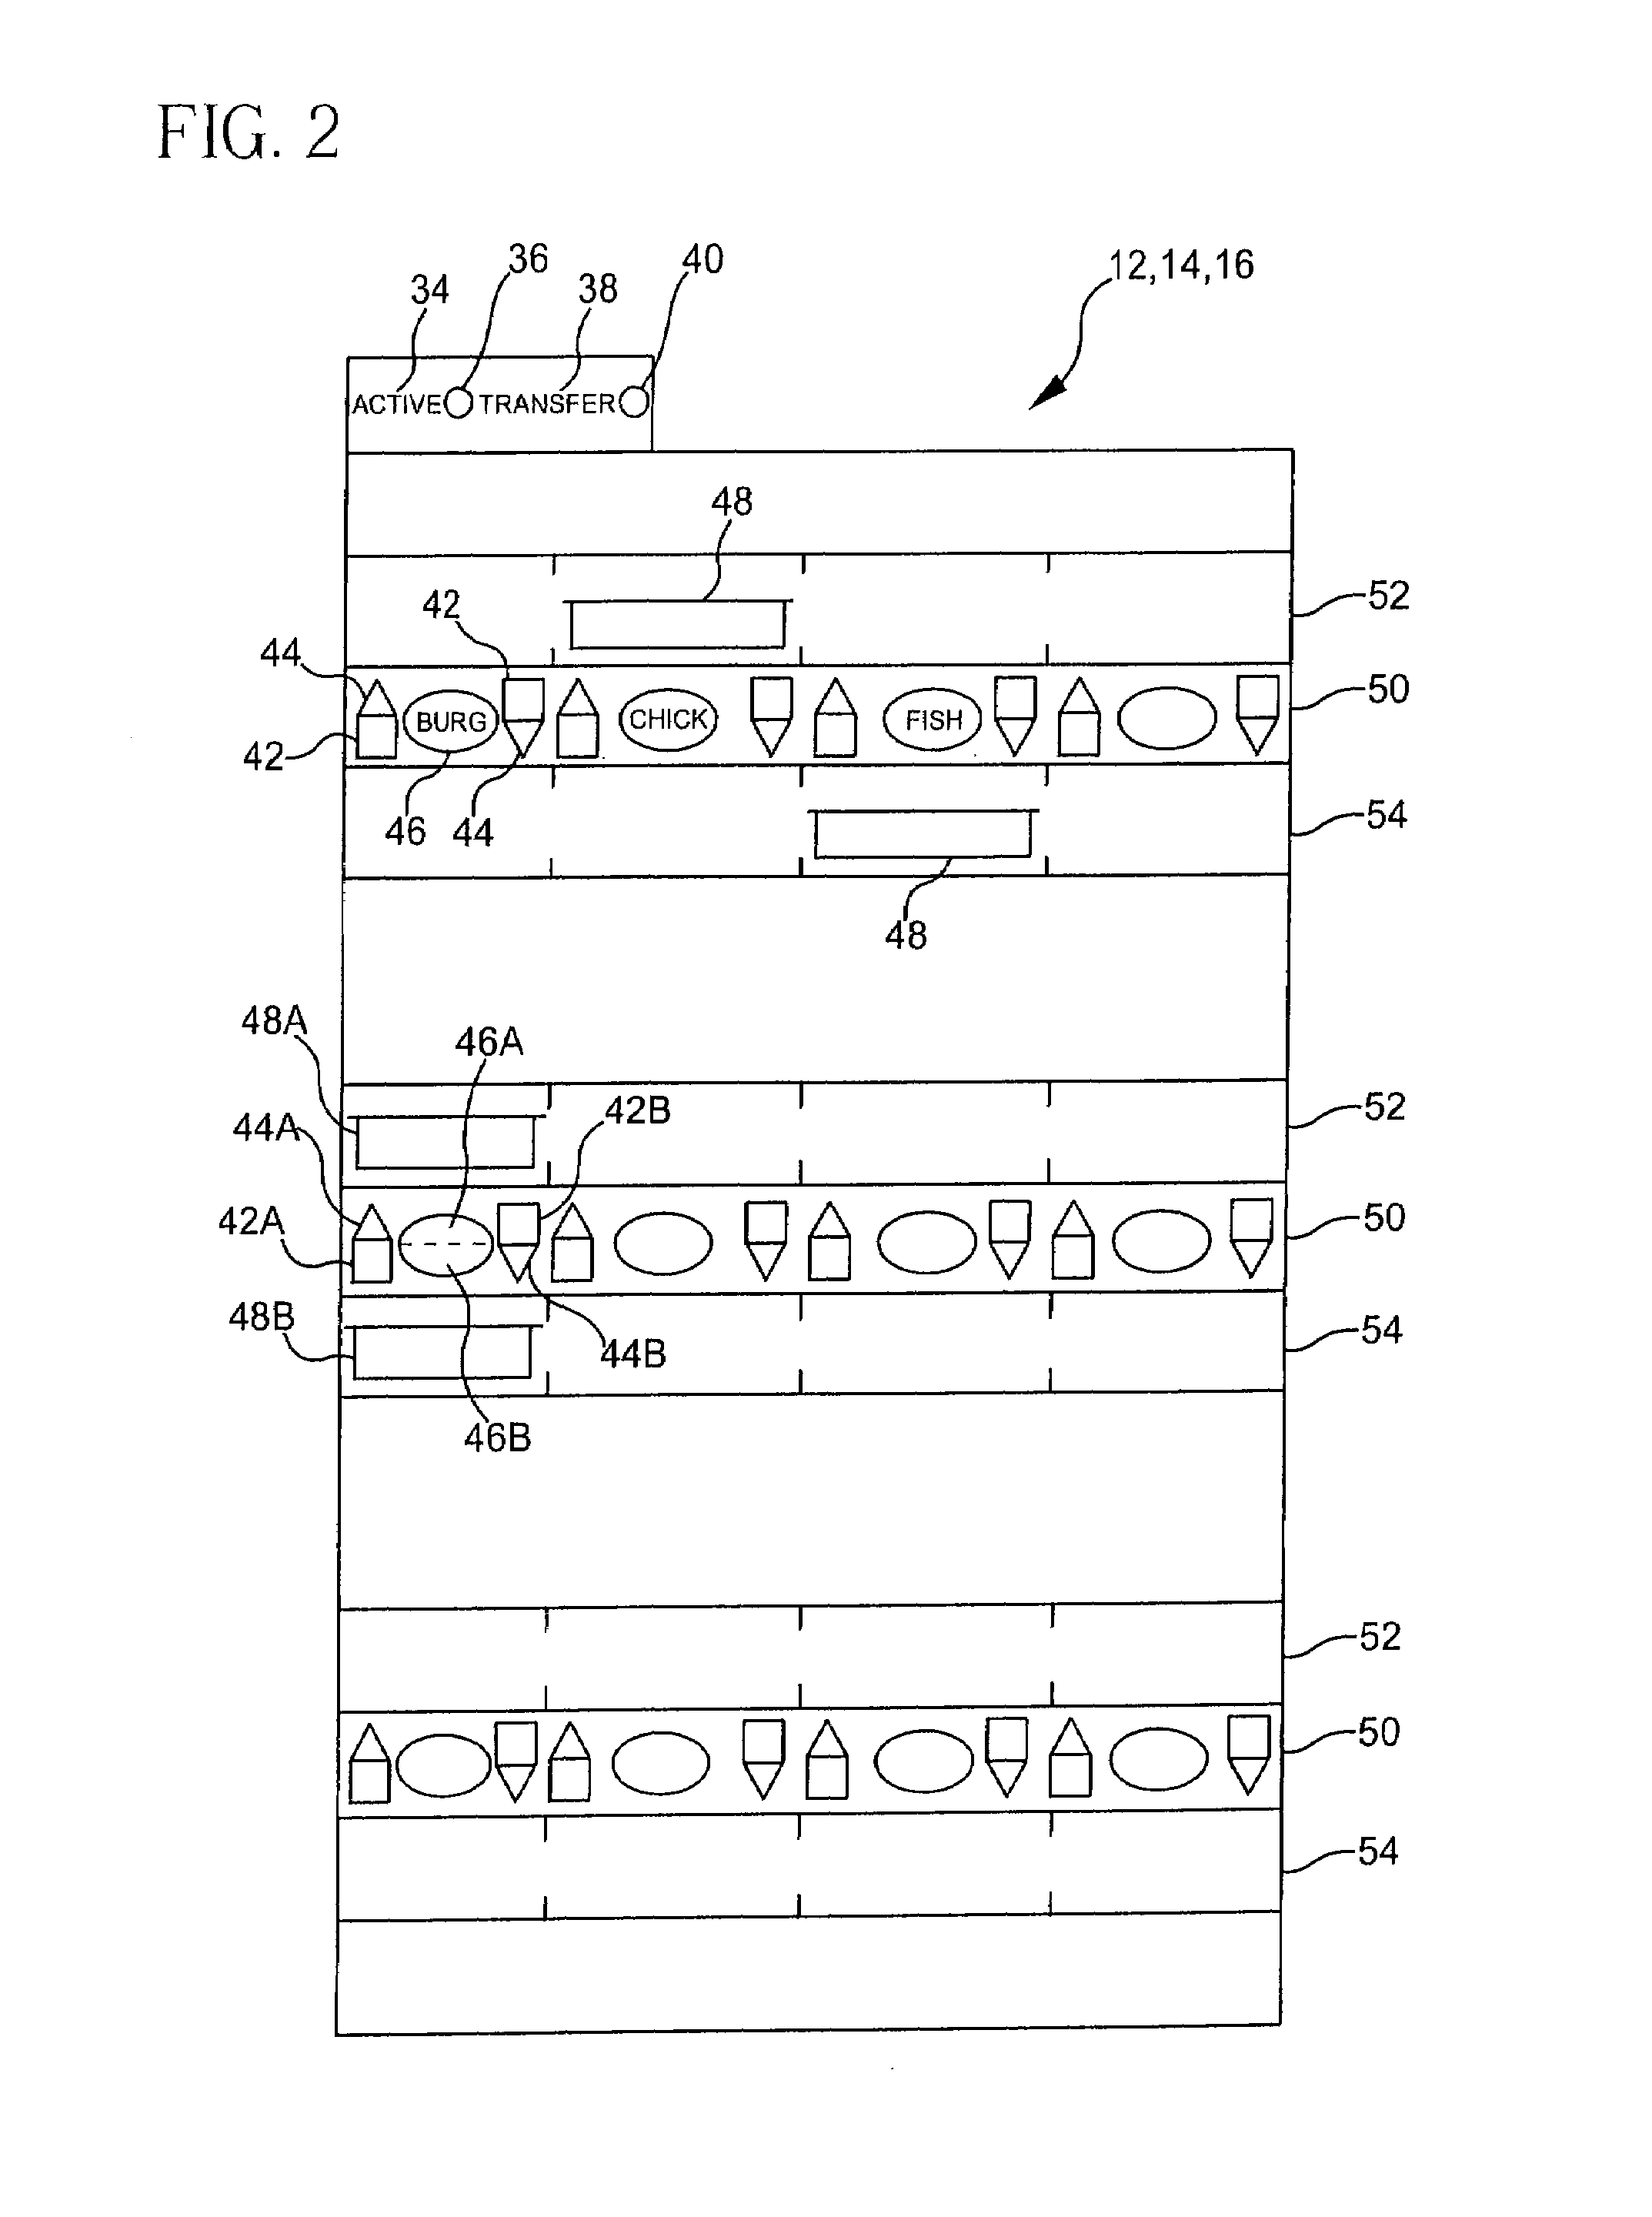 Method and apparatus for monitoring the status and transfer of food products